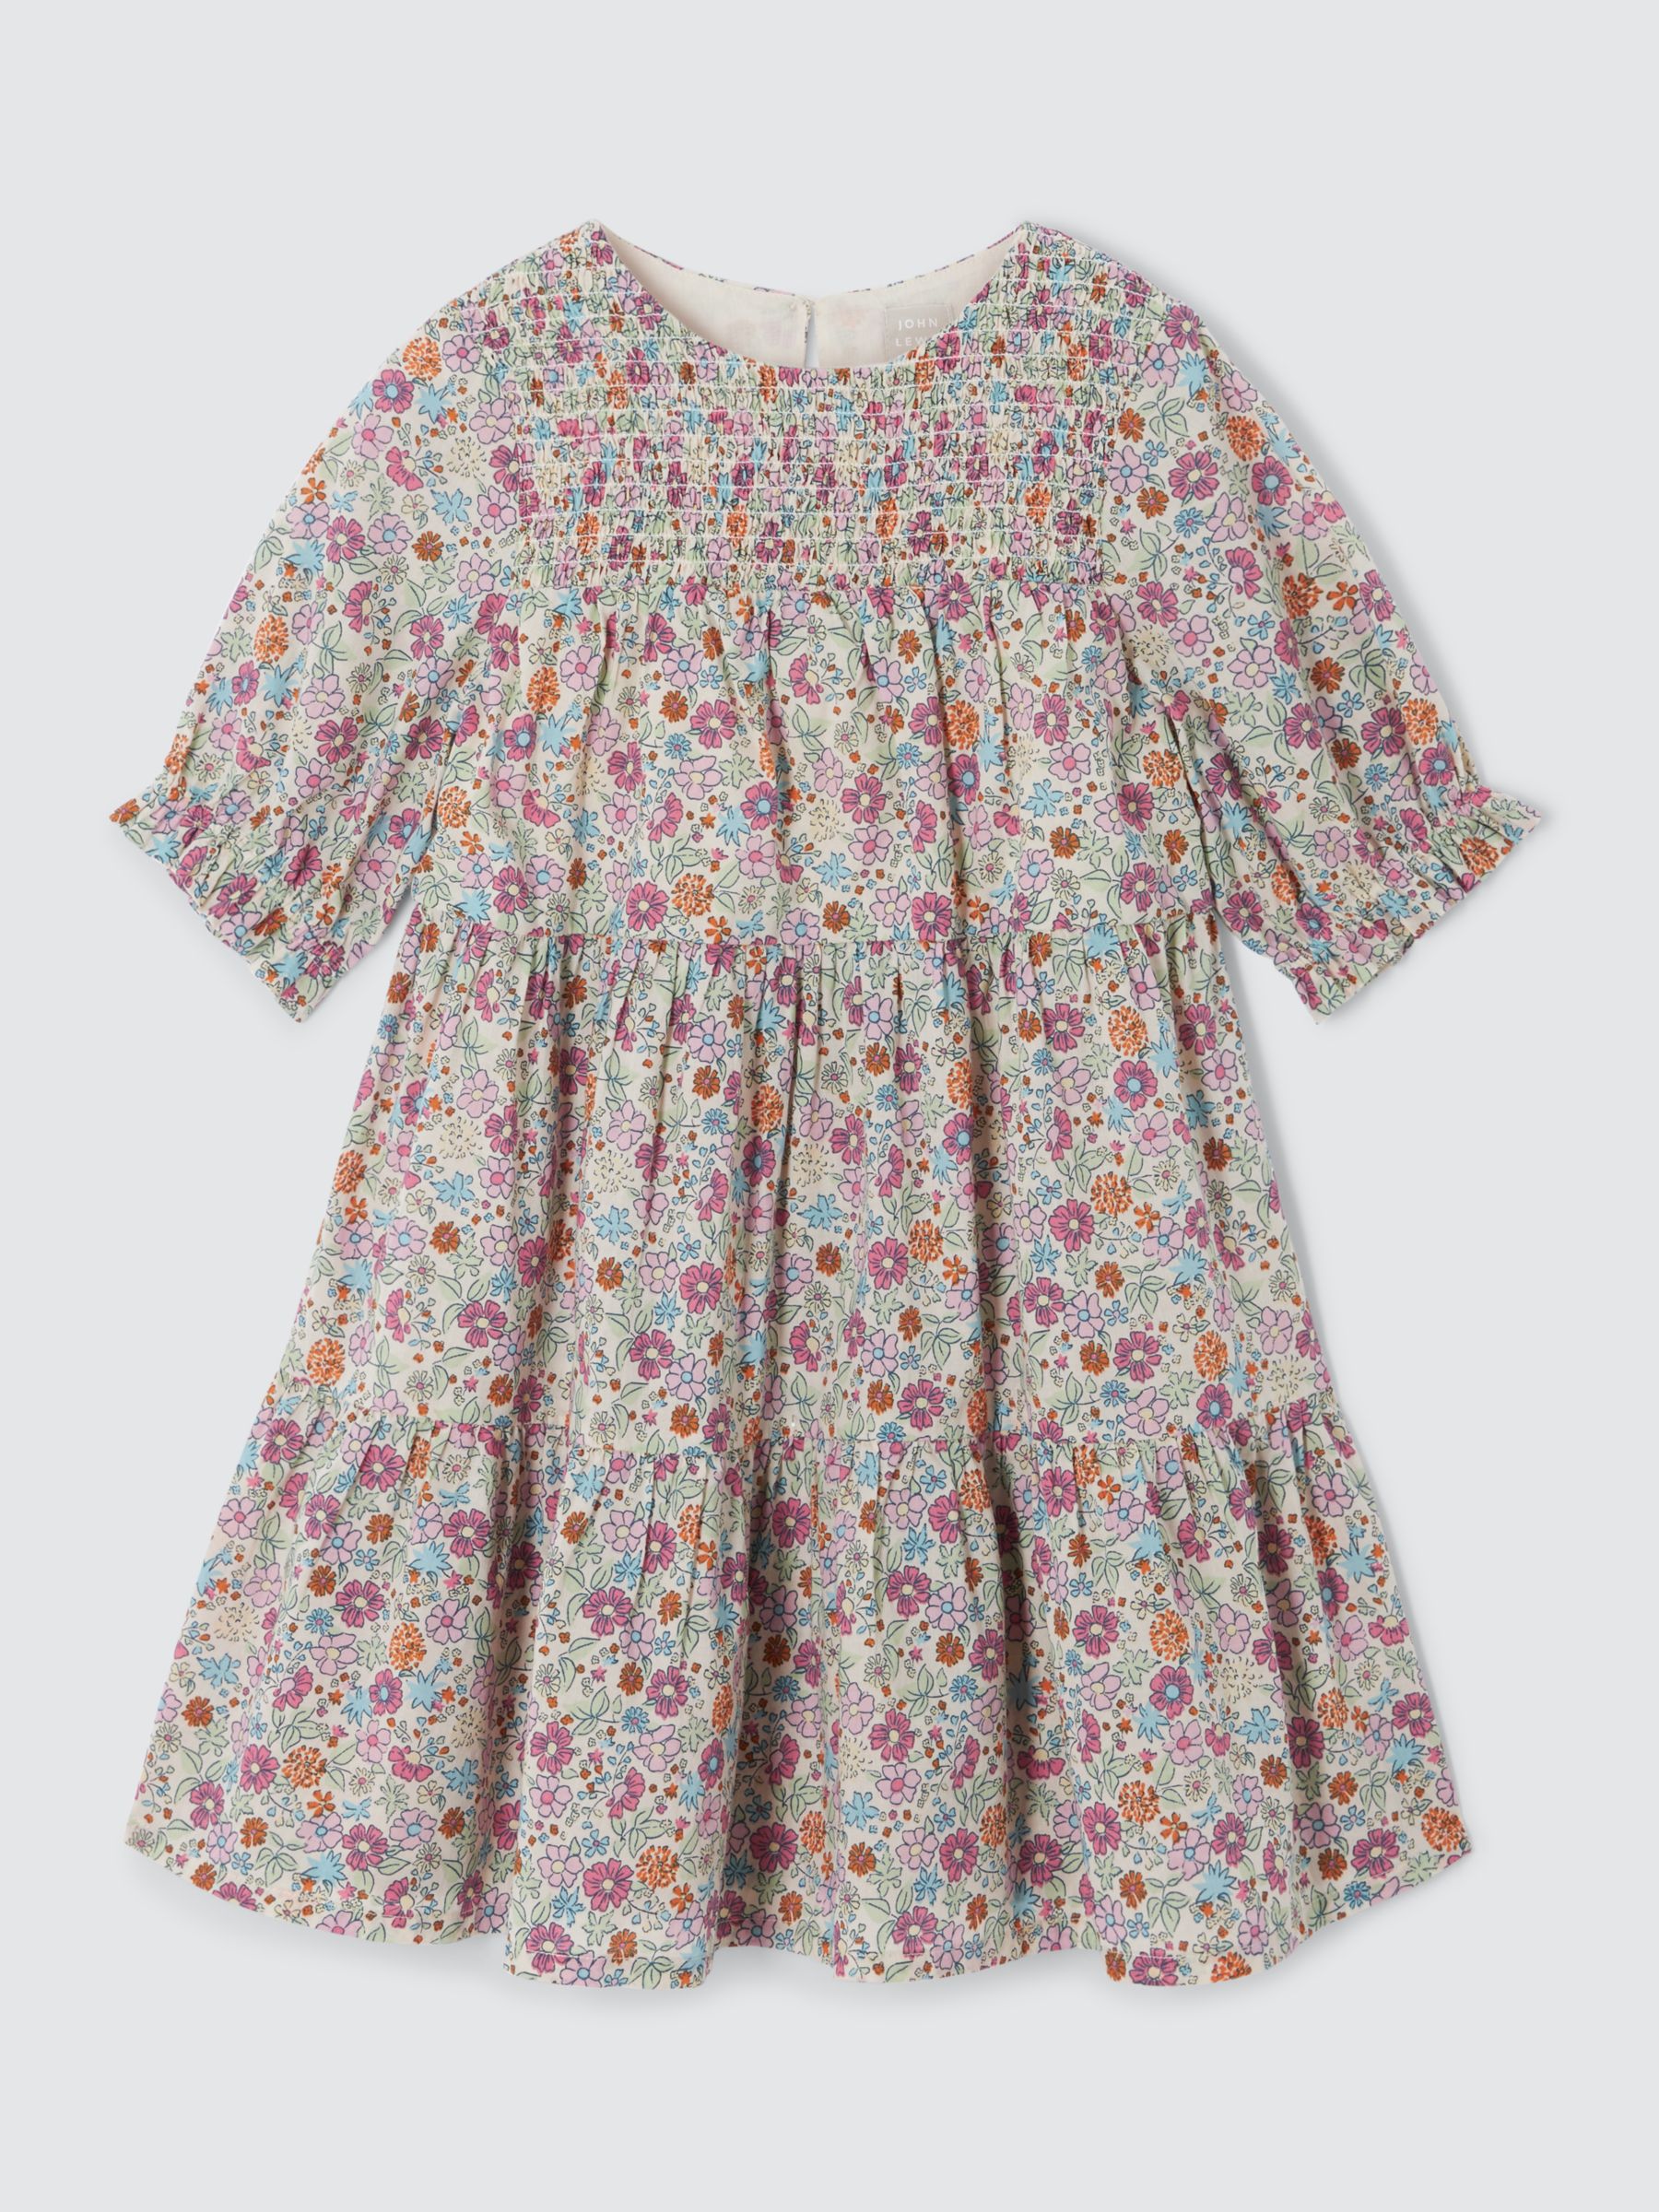 John Lewis Kids' Ditsy Floral Tiered Dress, Multi, 7 years